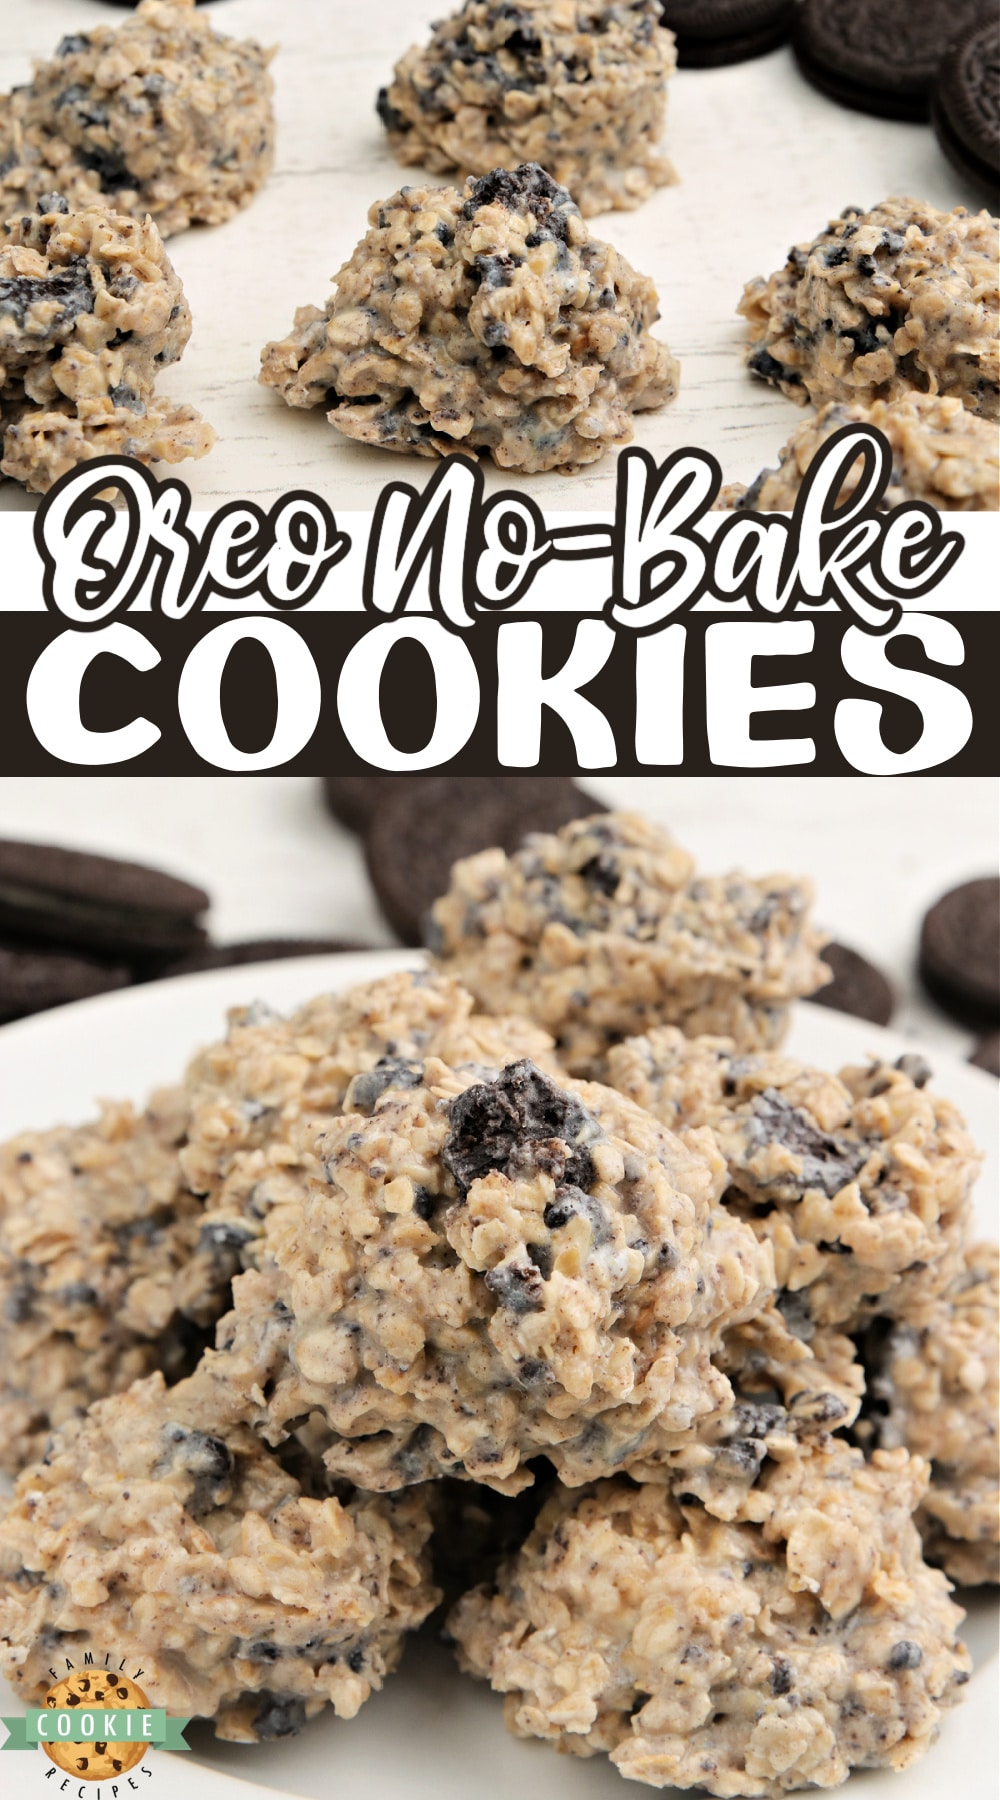 Oreo No Bake Cookies made with oats, Oreos and a few other simple ingredients. Delicious no bake cookie recipe packed with cookies and cream flavor!